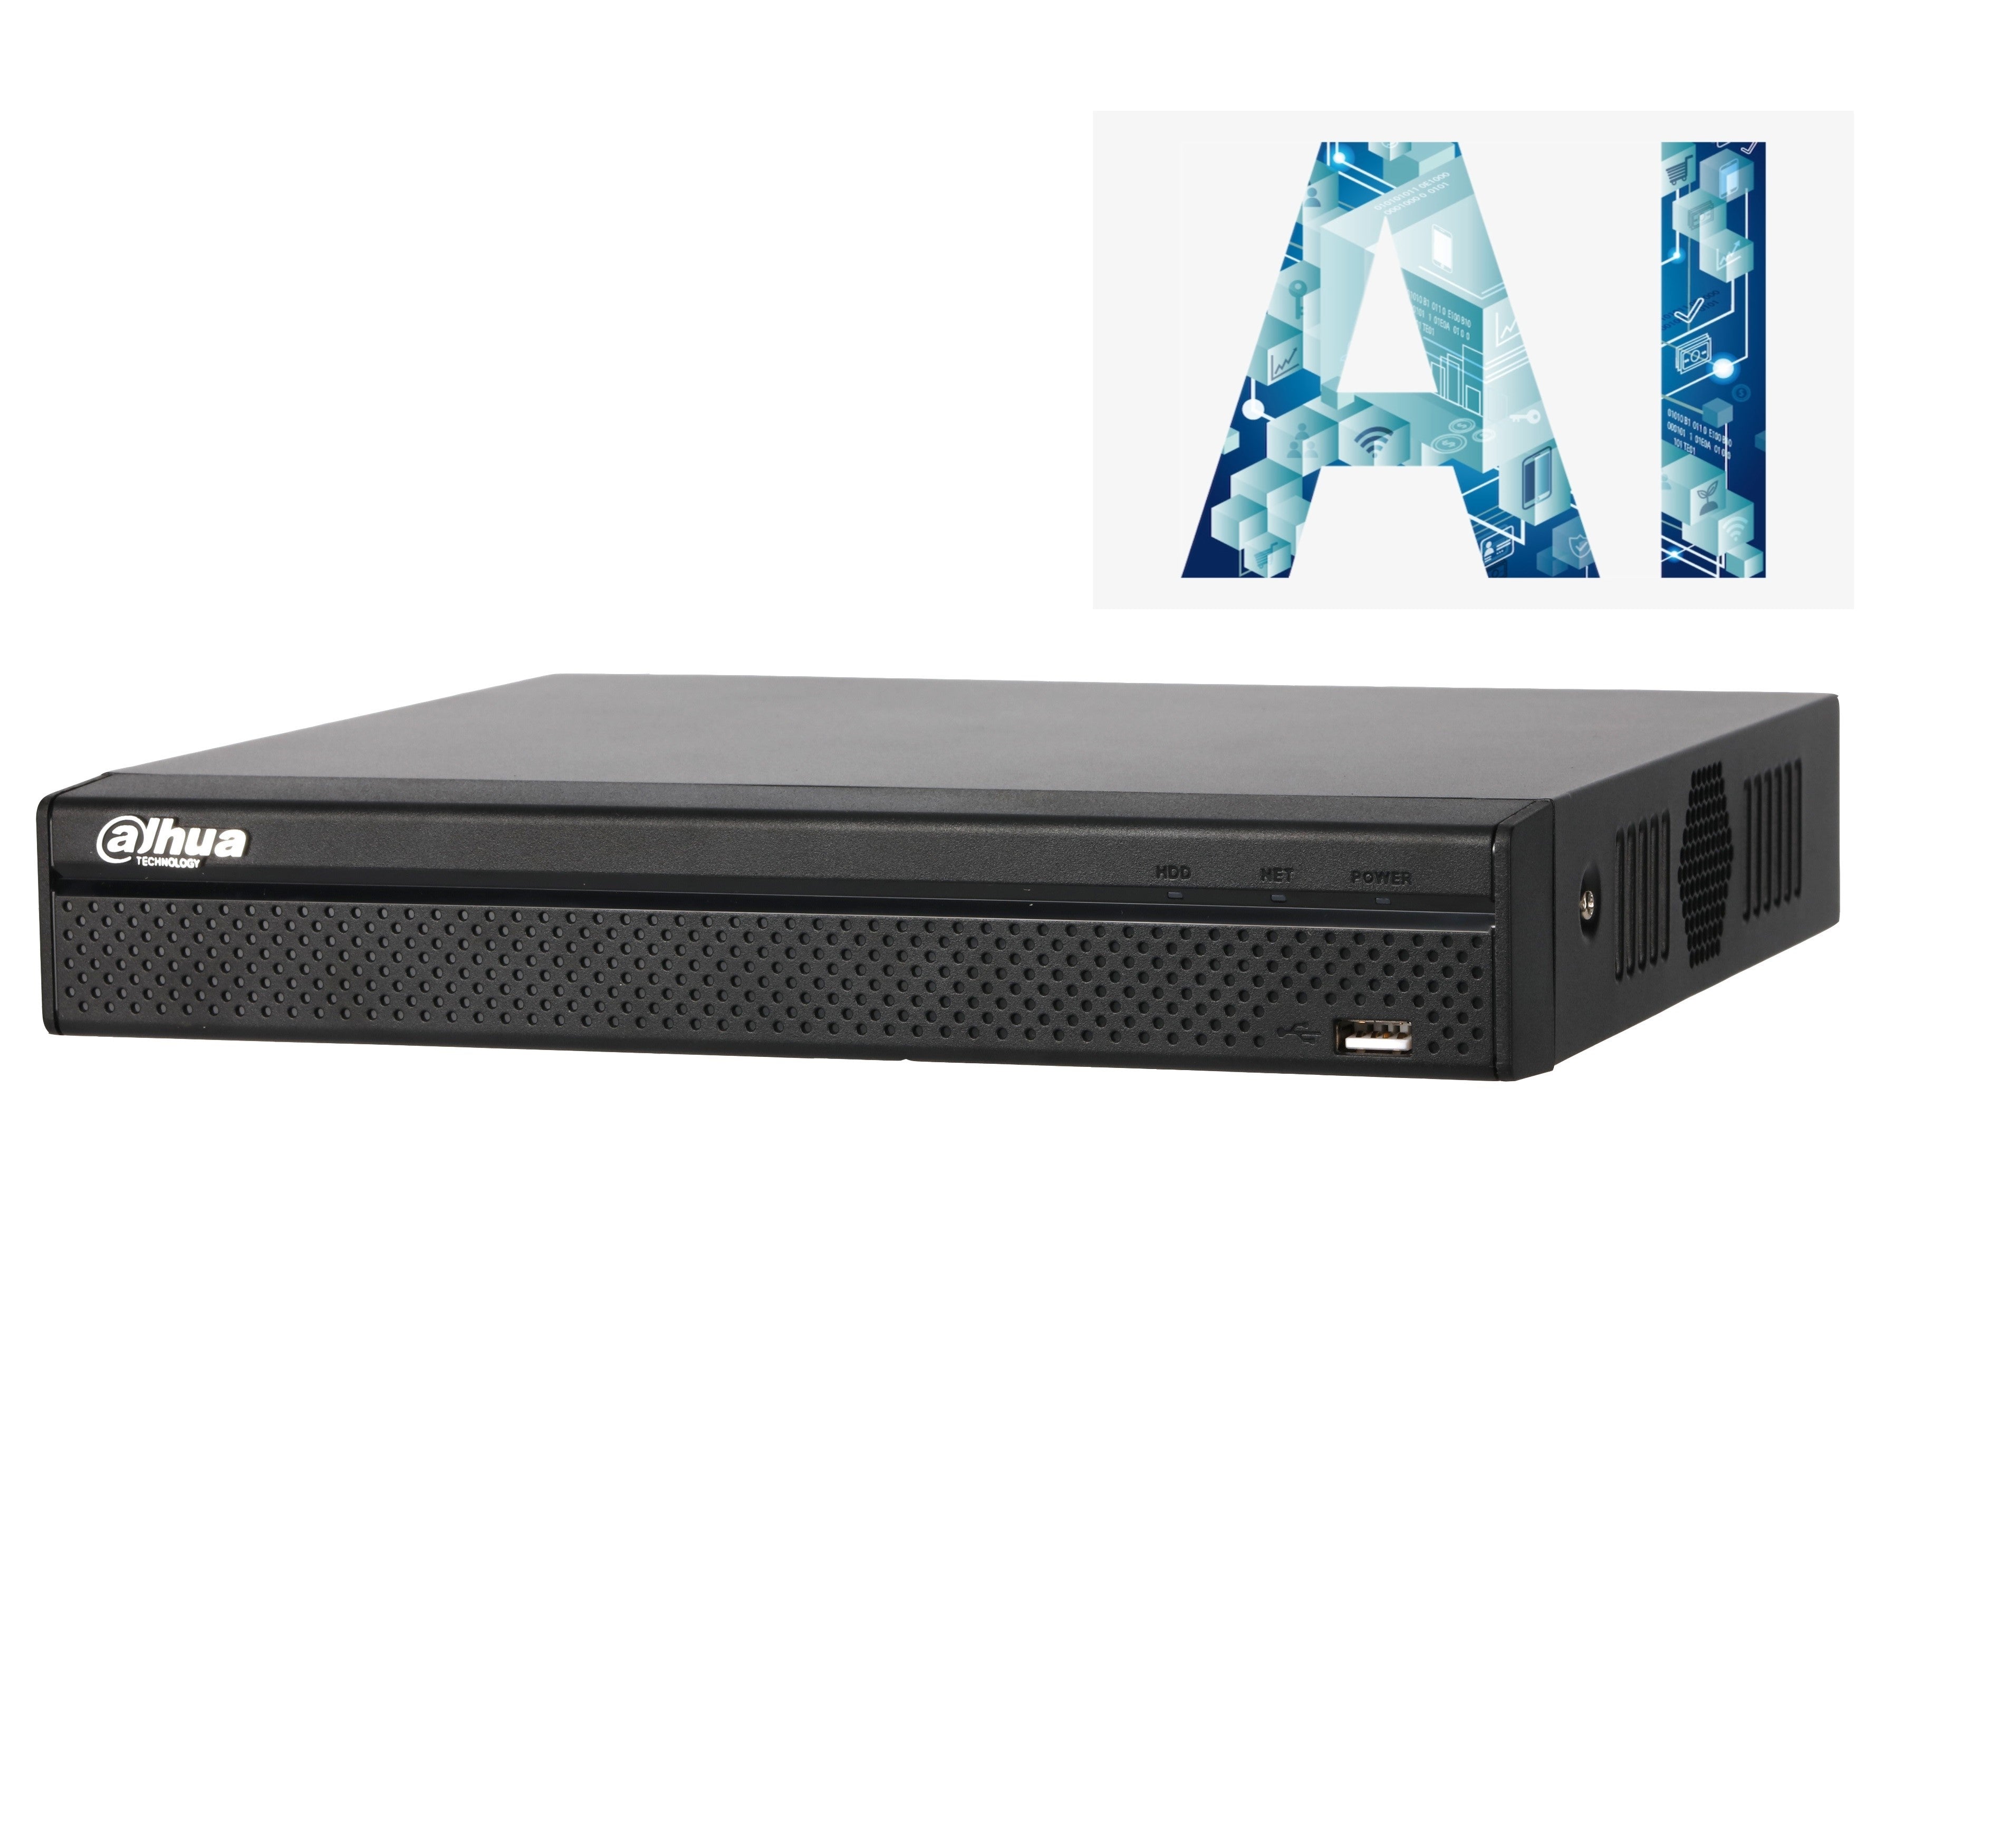 Dahua DHI-NVR4216-16P-AI/ANZ 16 Channel up to 16MP Wizsense Network Video Recorder